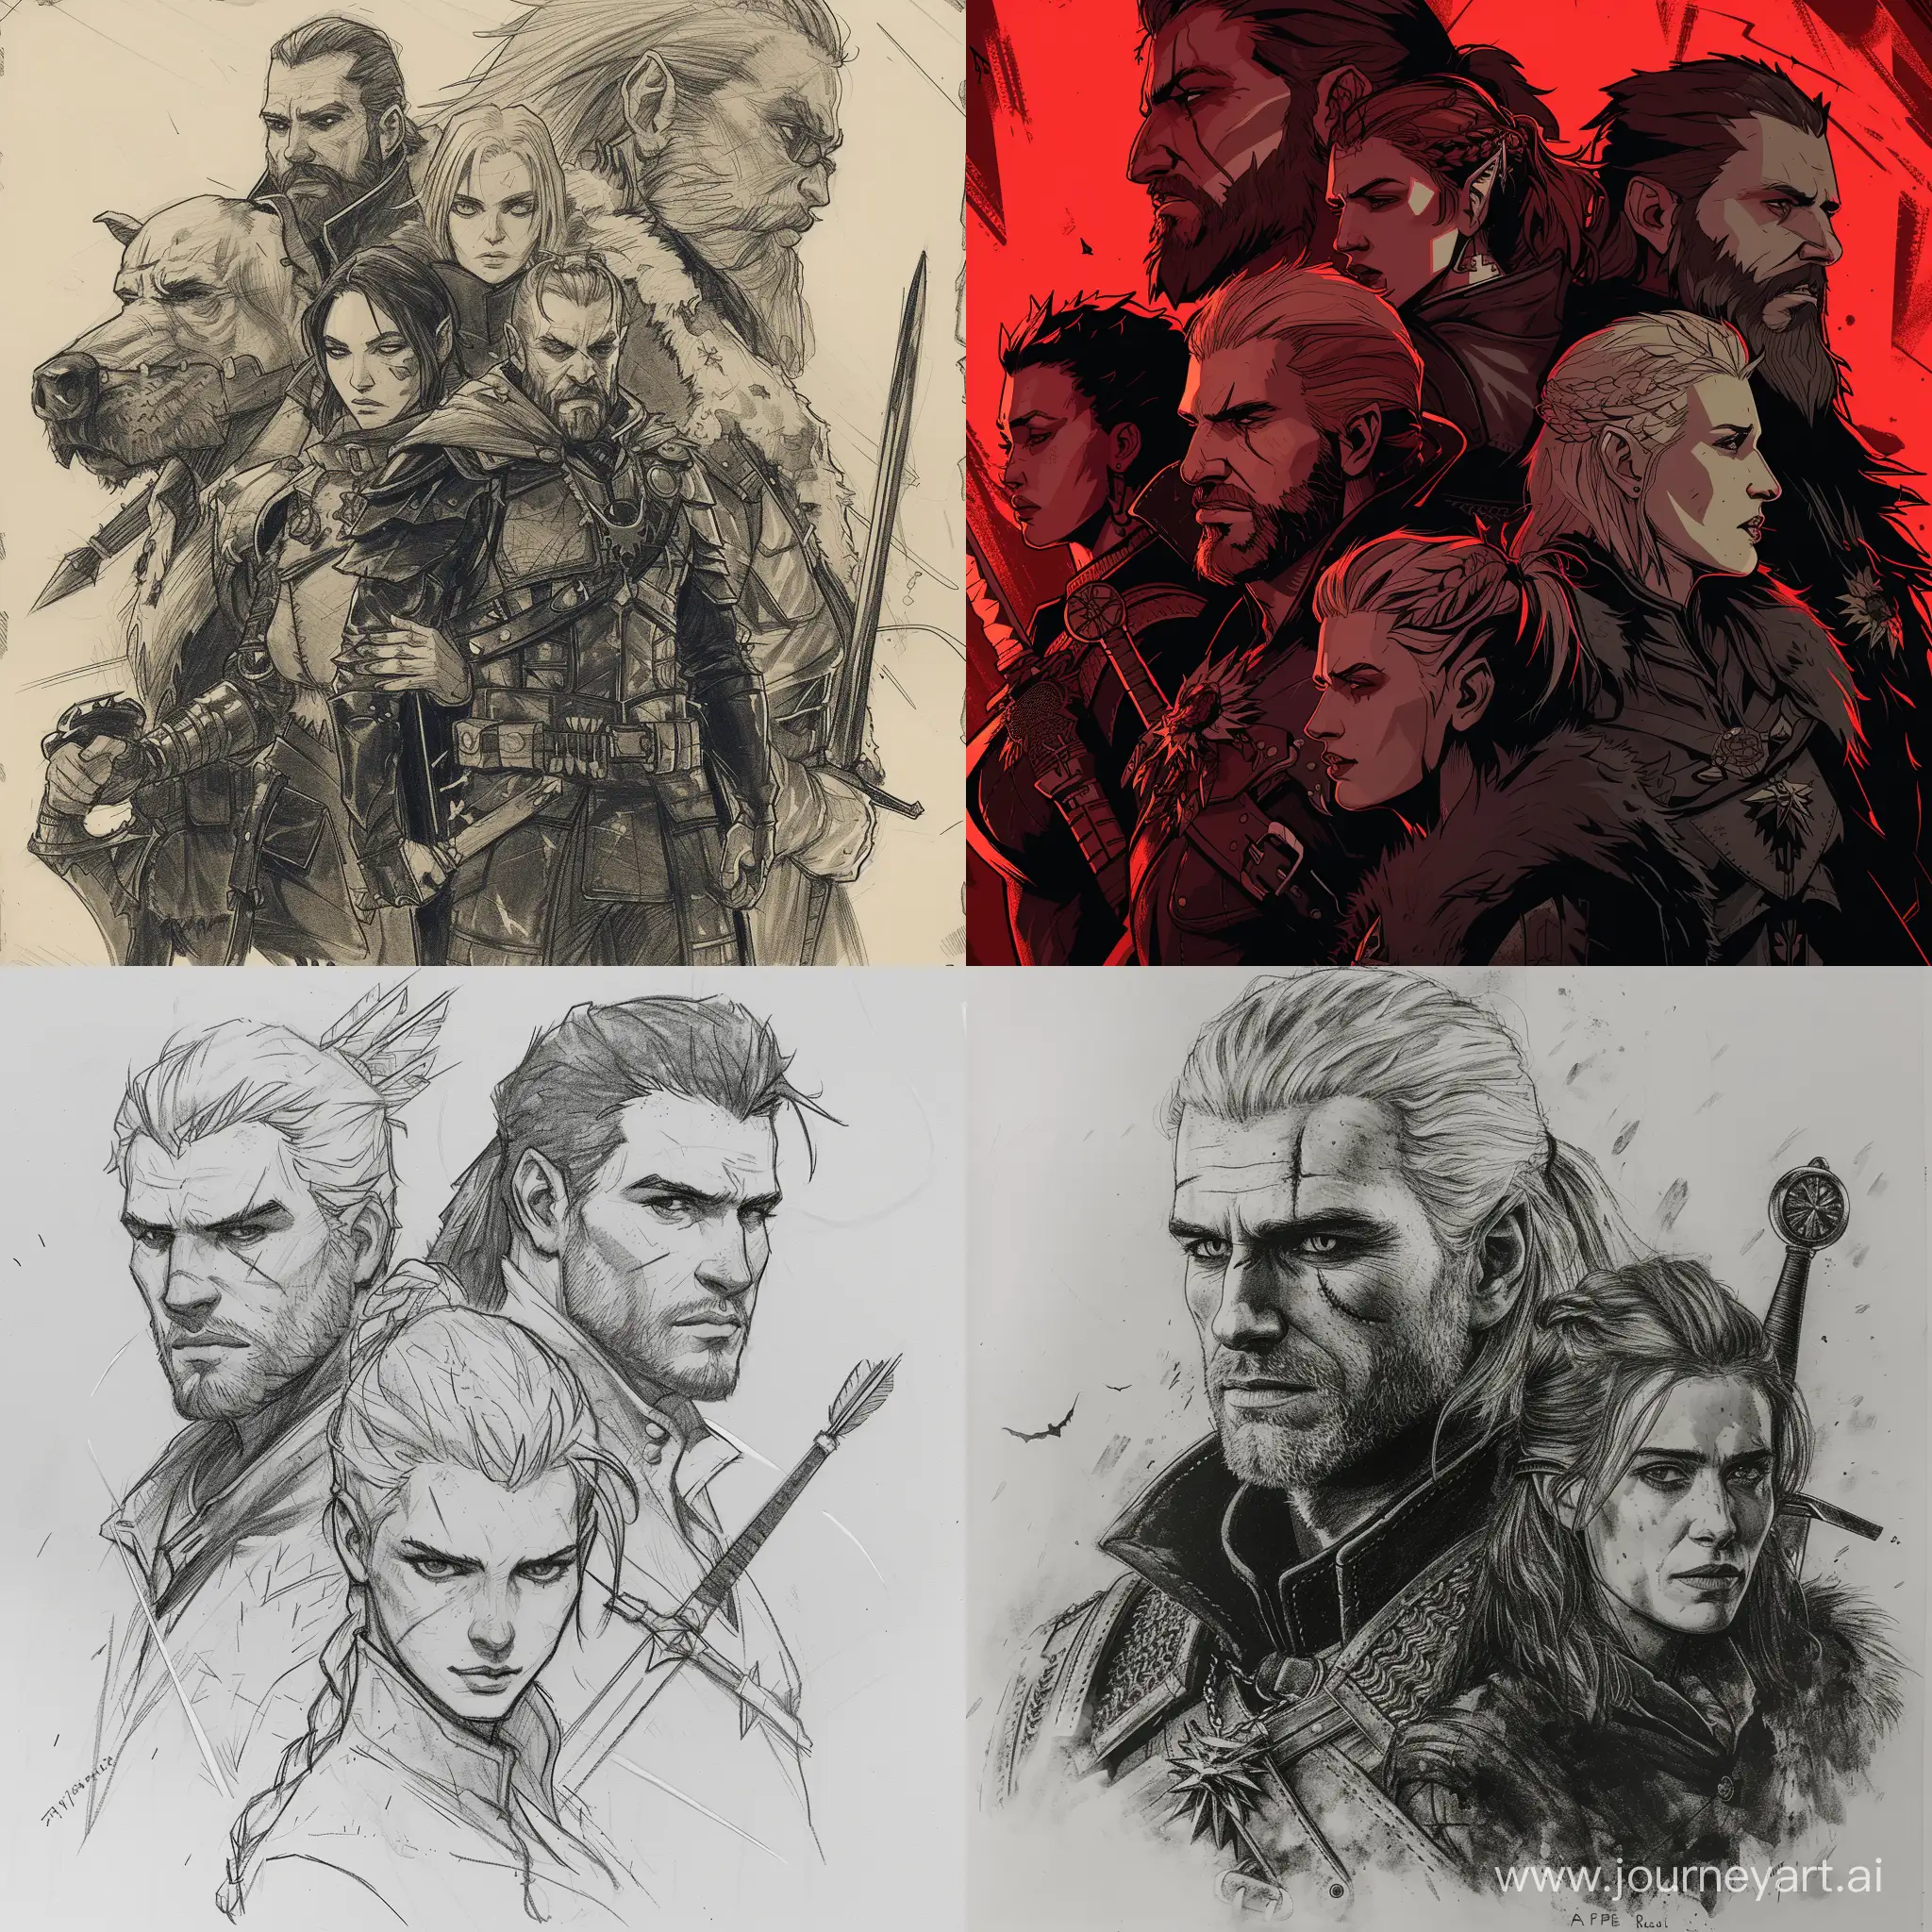 members of the Ramstein group, drawing in "witcher 3: wild hunt" style